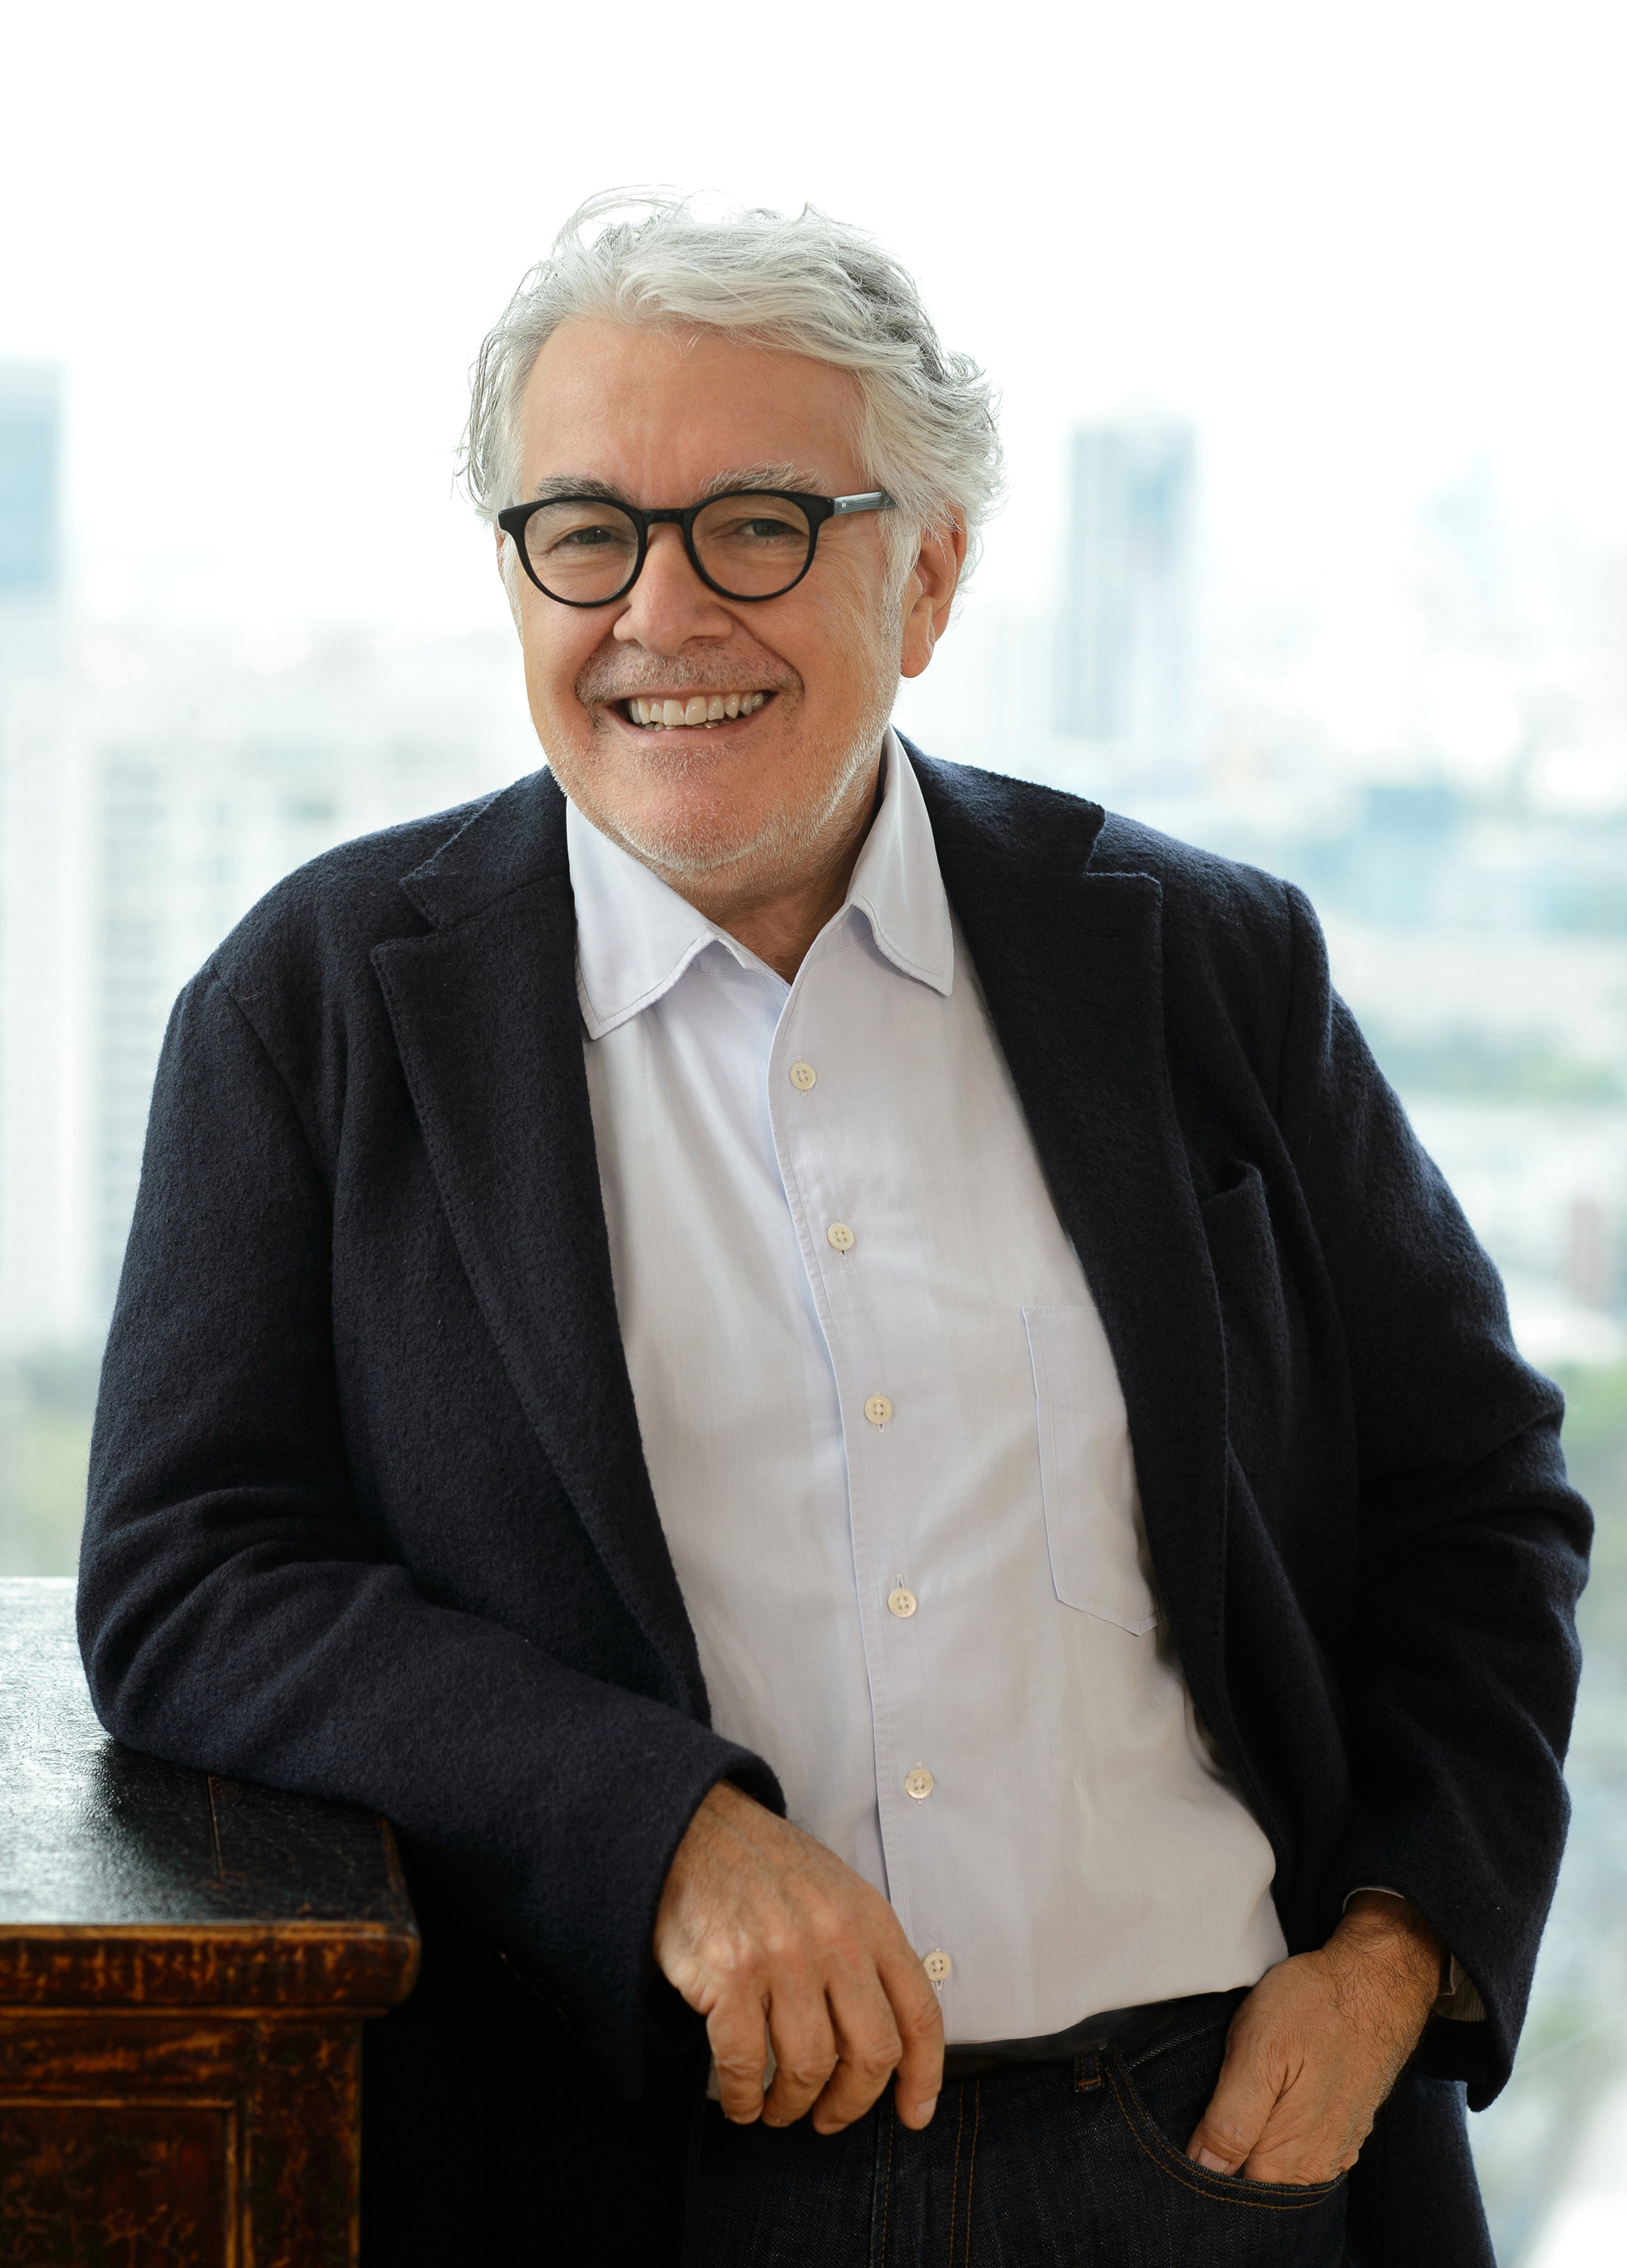 Neil Jacobs is CEO of Six Senses, the global luxury brand that redefined hospitality through a wellness and sustainability lens, with award-winning resorts and spas across Asia, Europe, the Middle Eas